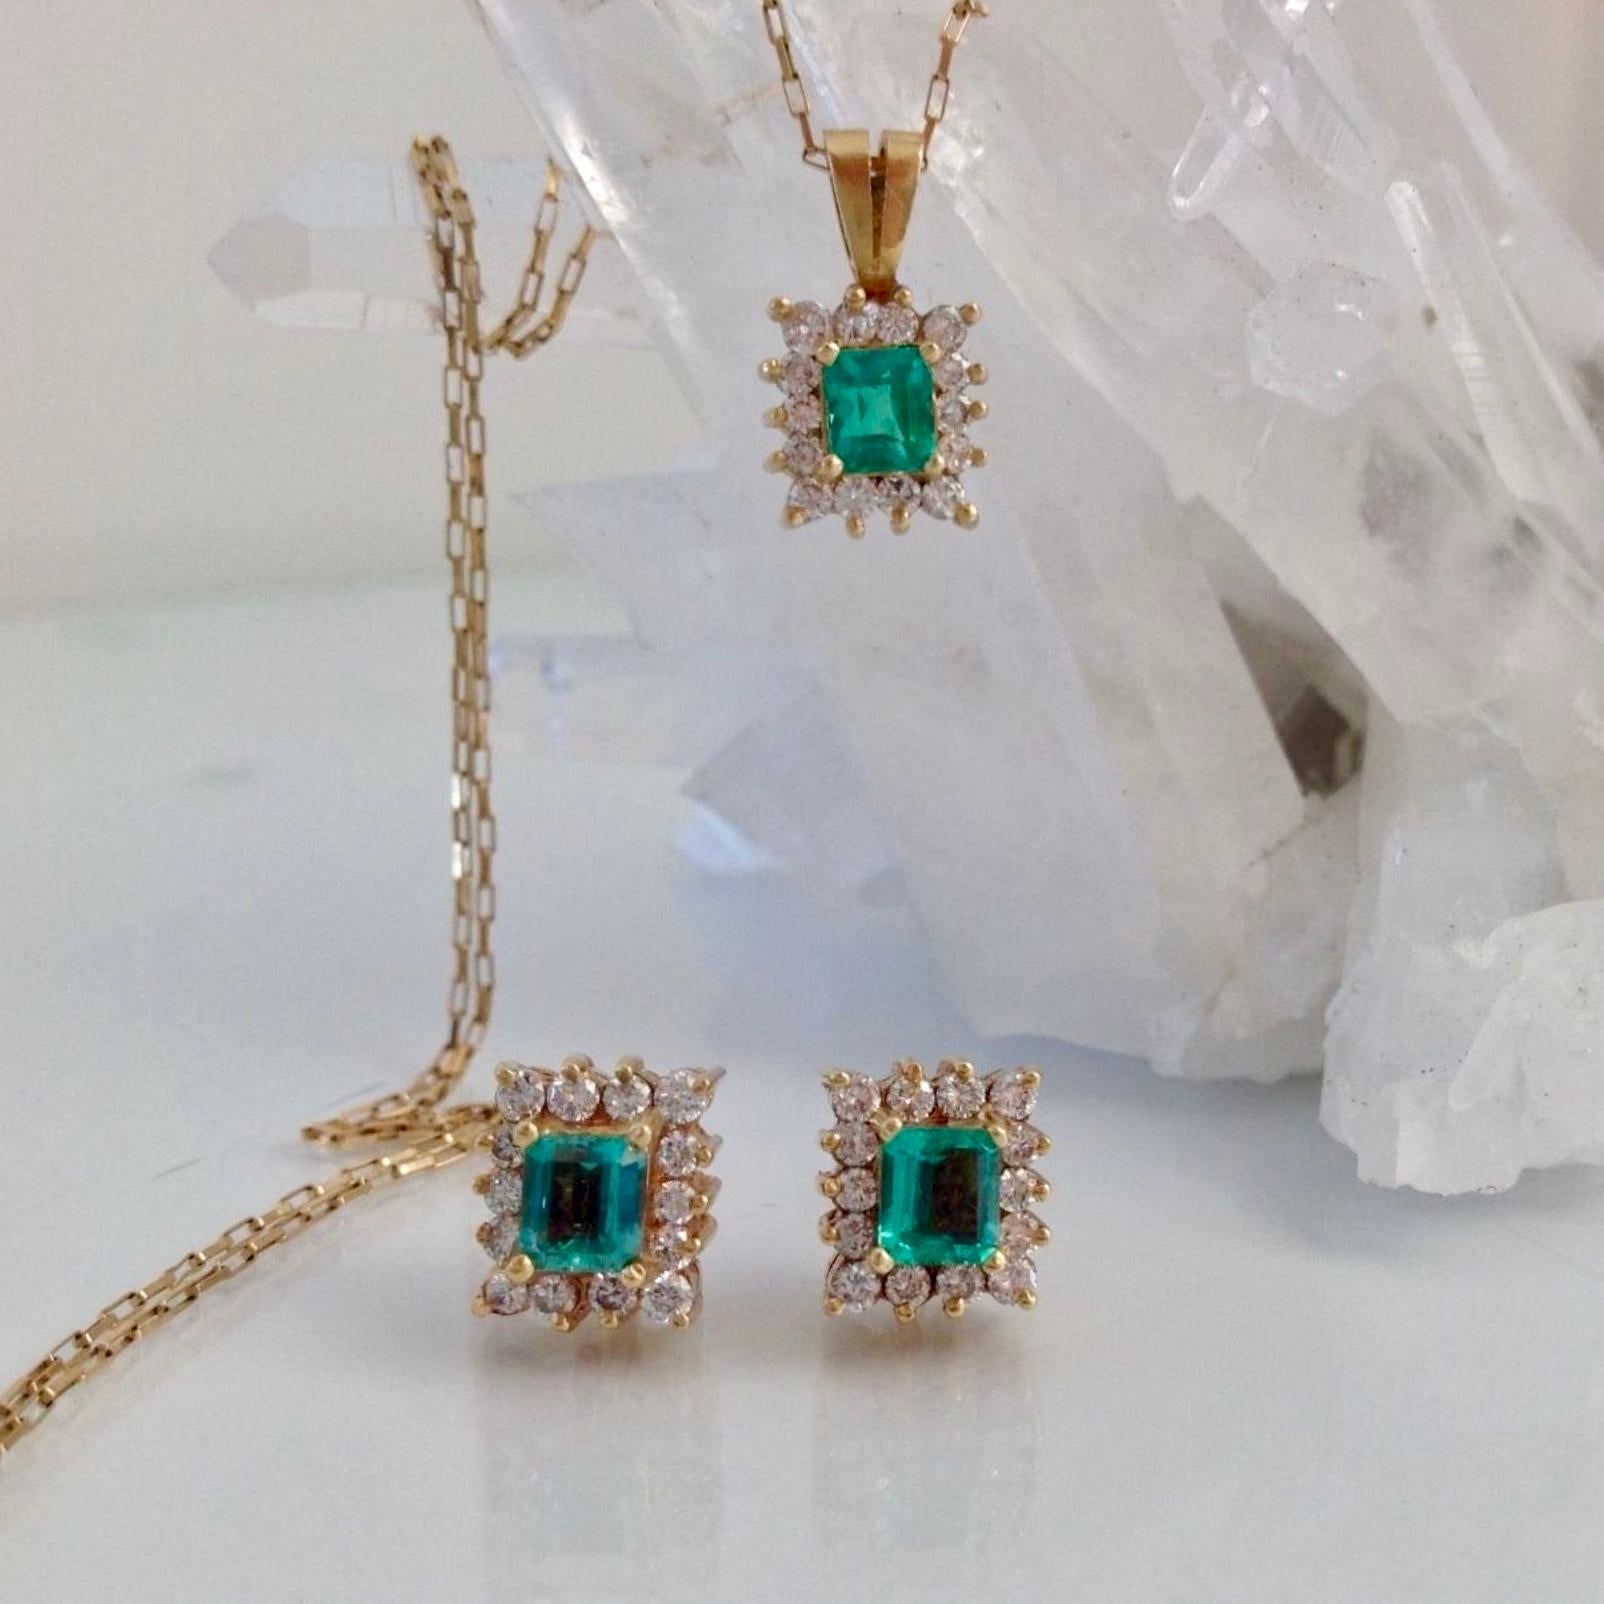 Fine Suite of Natural Colombian Emerald emerald Cut on a Custom Made of Solid 18K Yellow Gold set with diamonds. Great for every day wear!
Pendant: Emerald 0.60ct & Diamond 0.39ct (E/VS1)
Stud Earrings: Emerald 1.20ct & Diamond 0.78ct (E/VS1)
Total